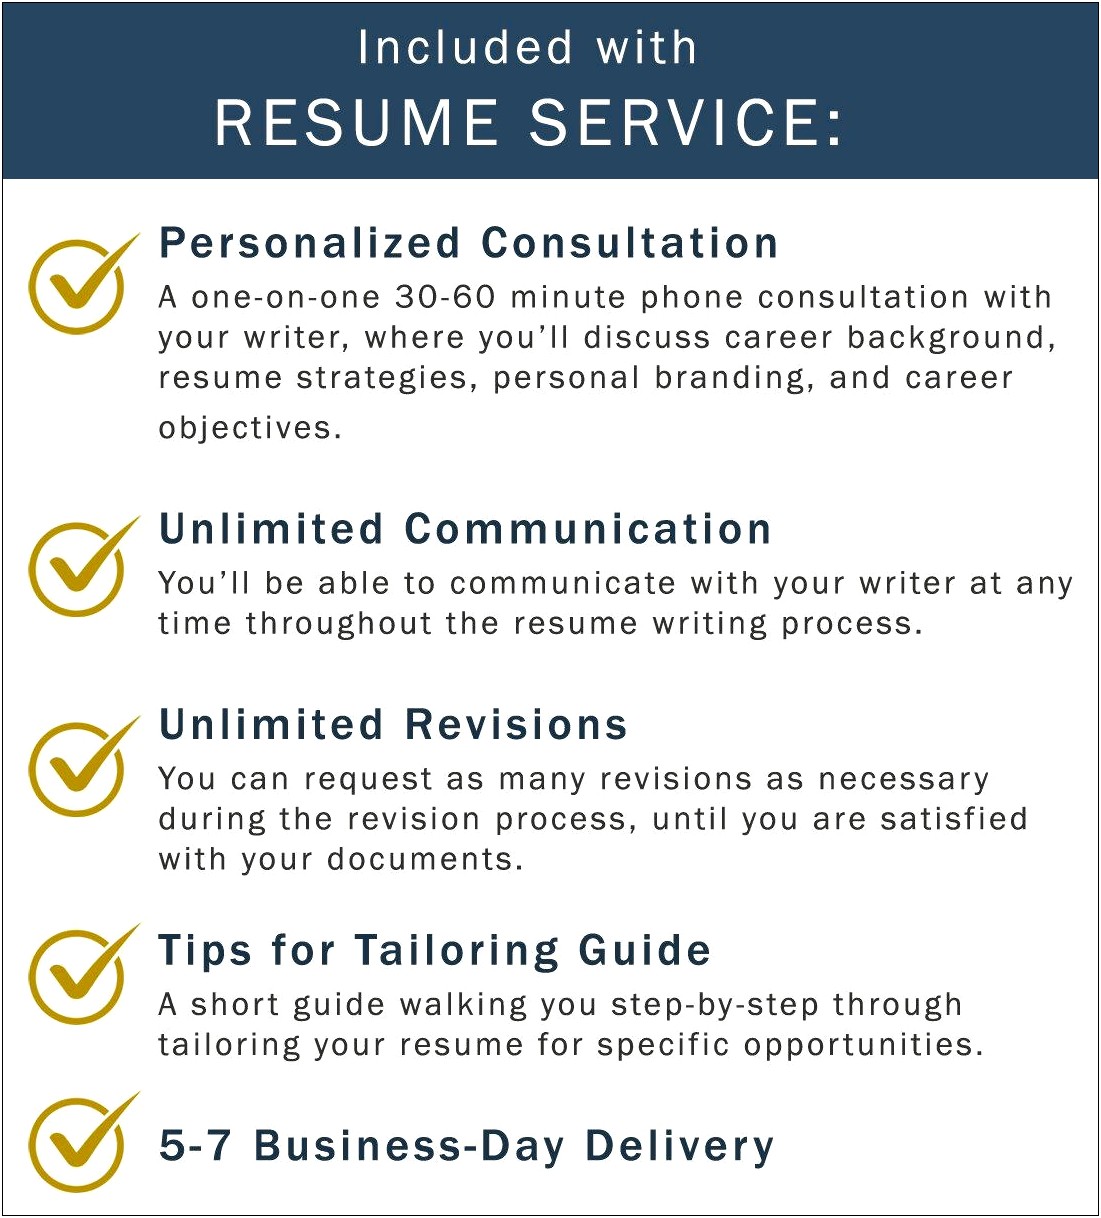 Company Best Resume Resume Services